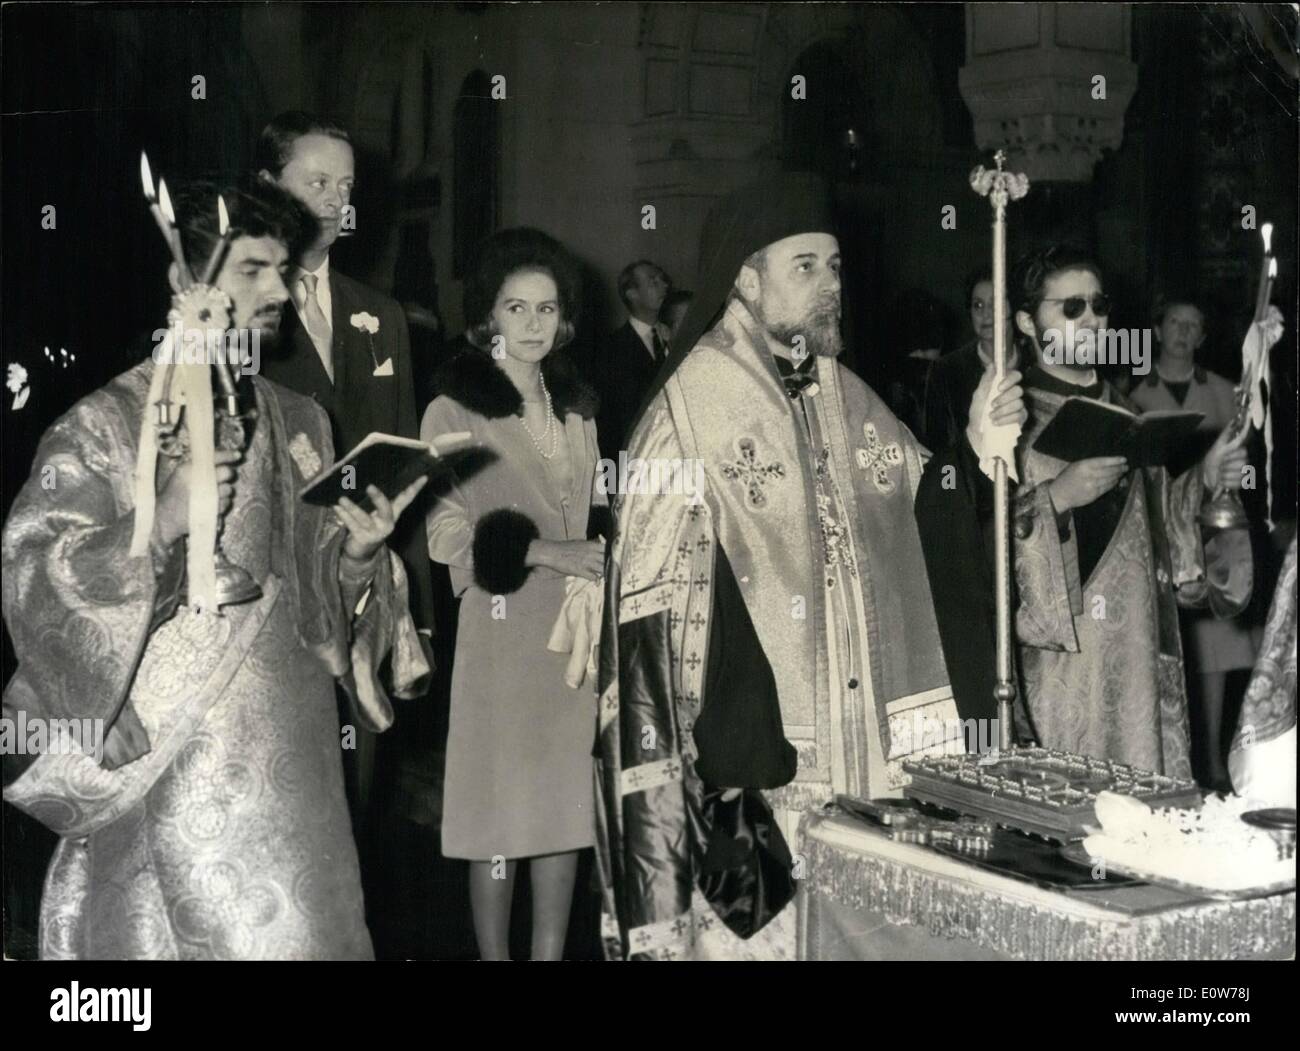 Oct. 10, 1961 - Tina Ex-Onassis Weds Lord Blandford: Photo shows. Religious ceremony at the creek orthodox church in Rue Georges Bizet, Paris, this afternoon. Stock Photo